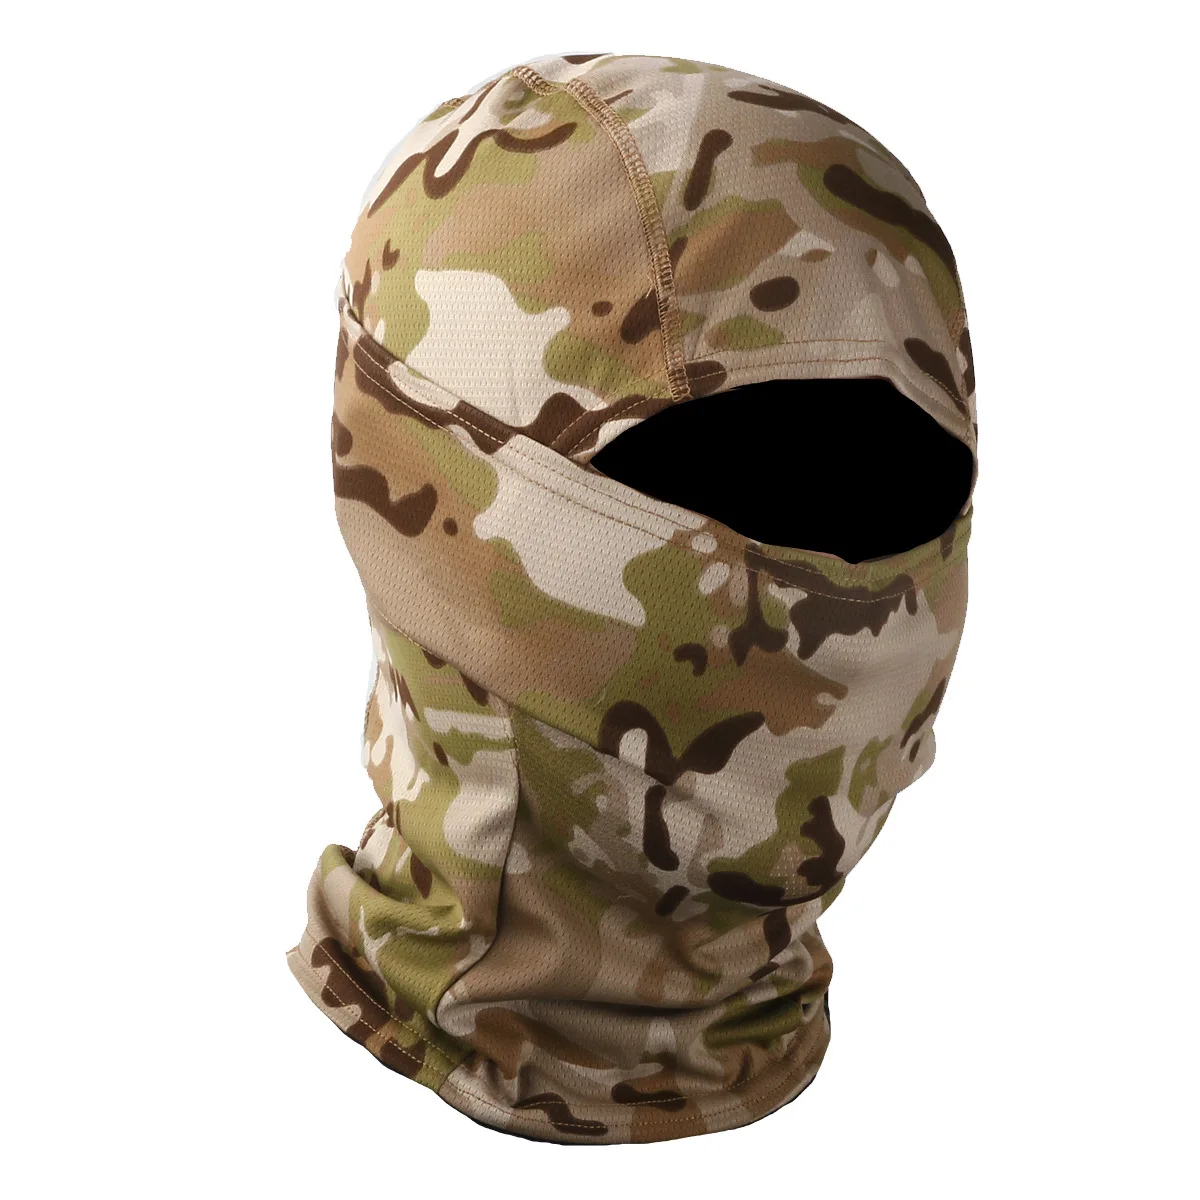 

Tactical Balaclava Full Face Mask Scarf Airsoft Paintball Mask Bandana Army Outdoor Fishing Hunting Camo Neck Gaiter Military